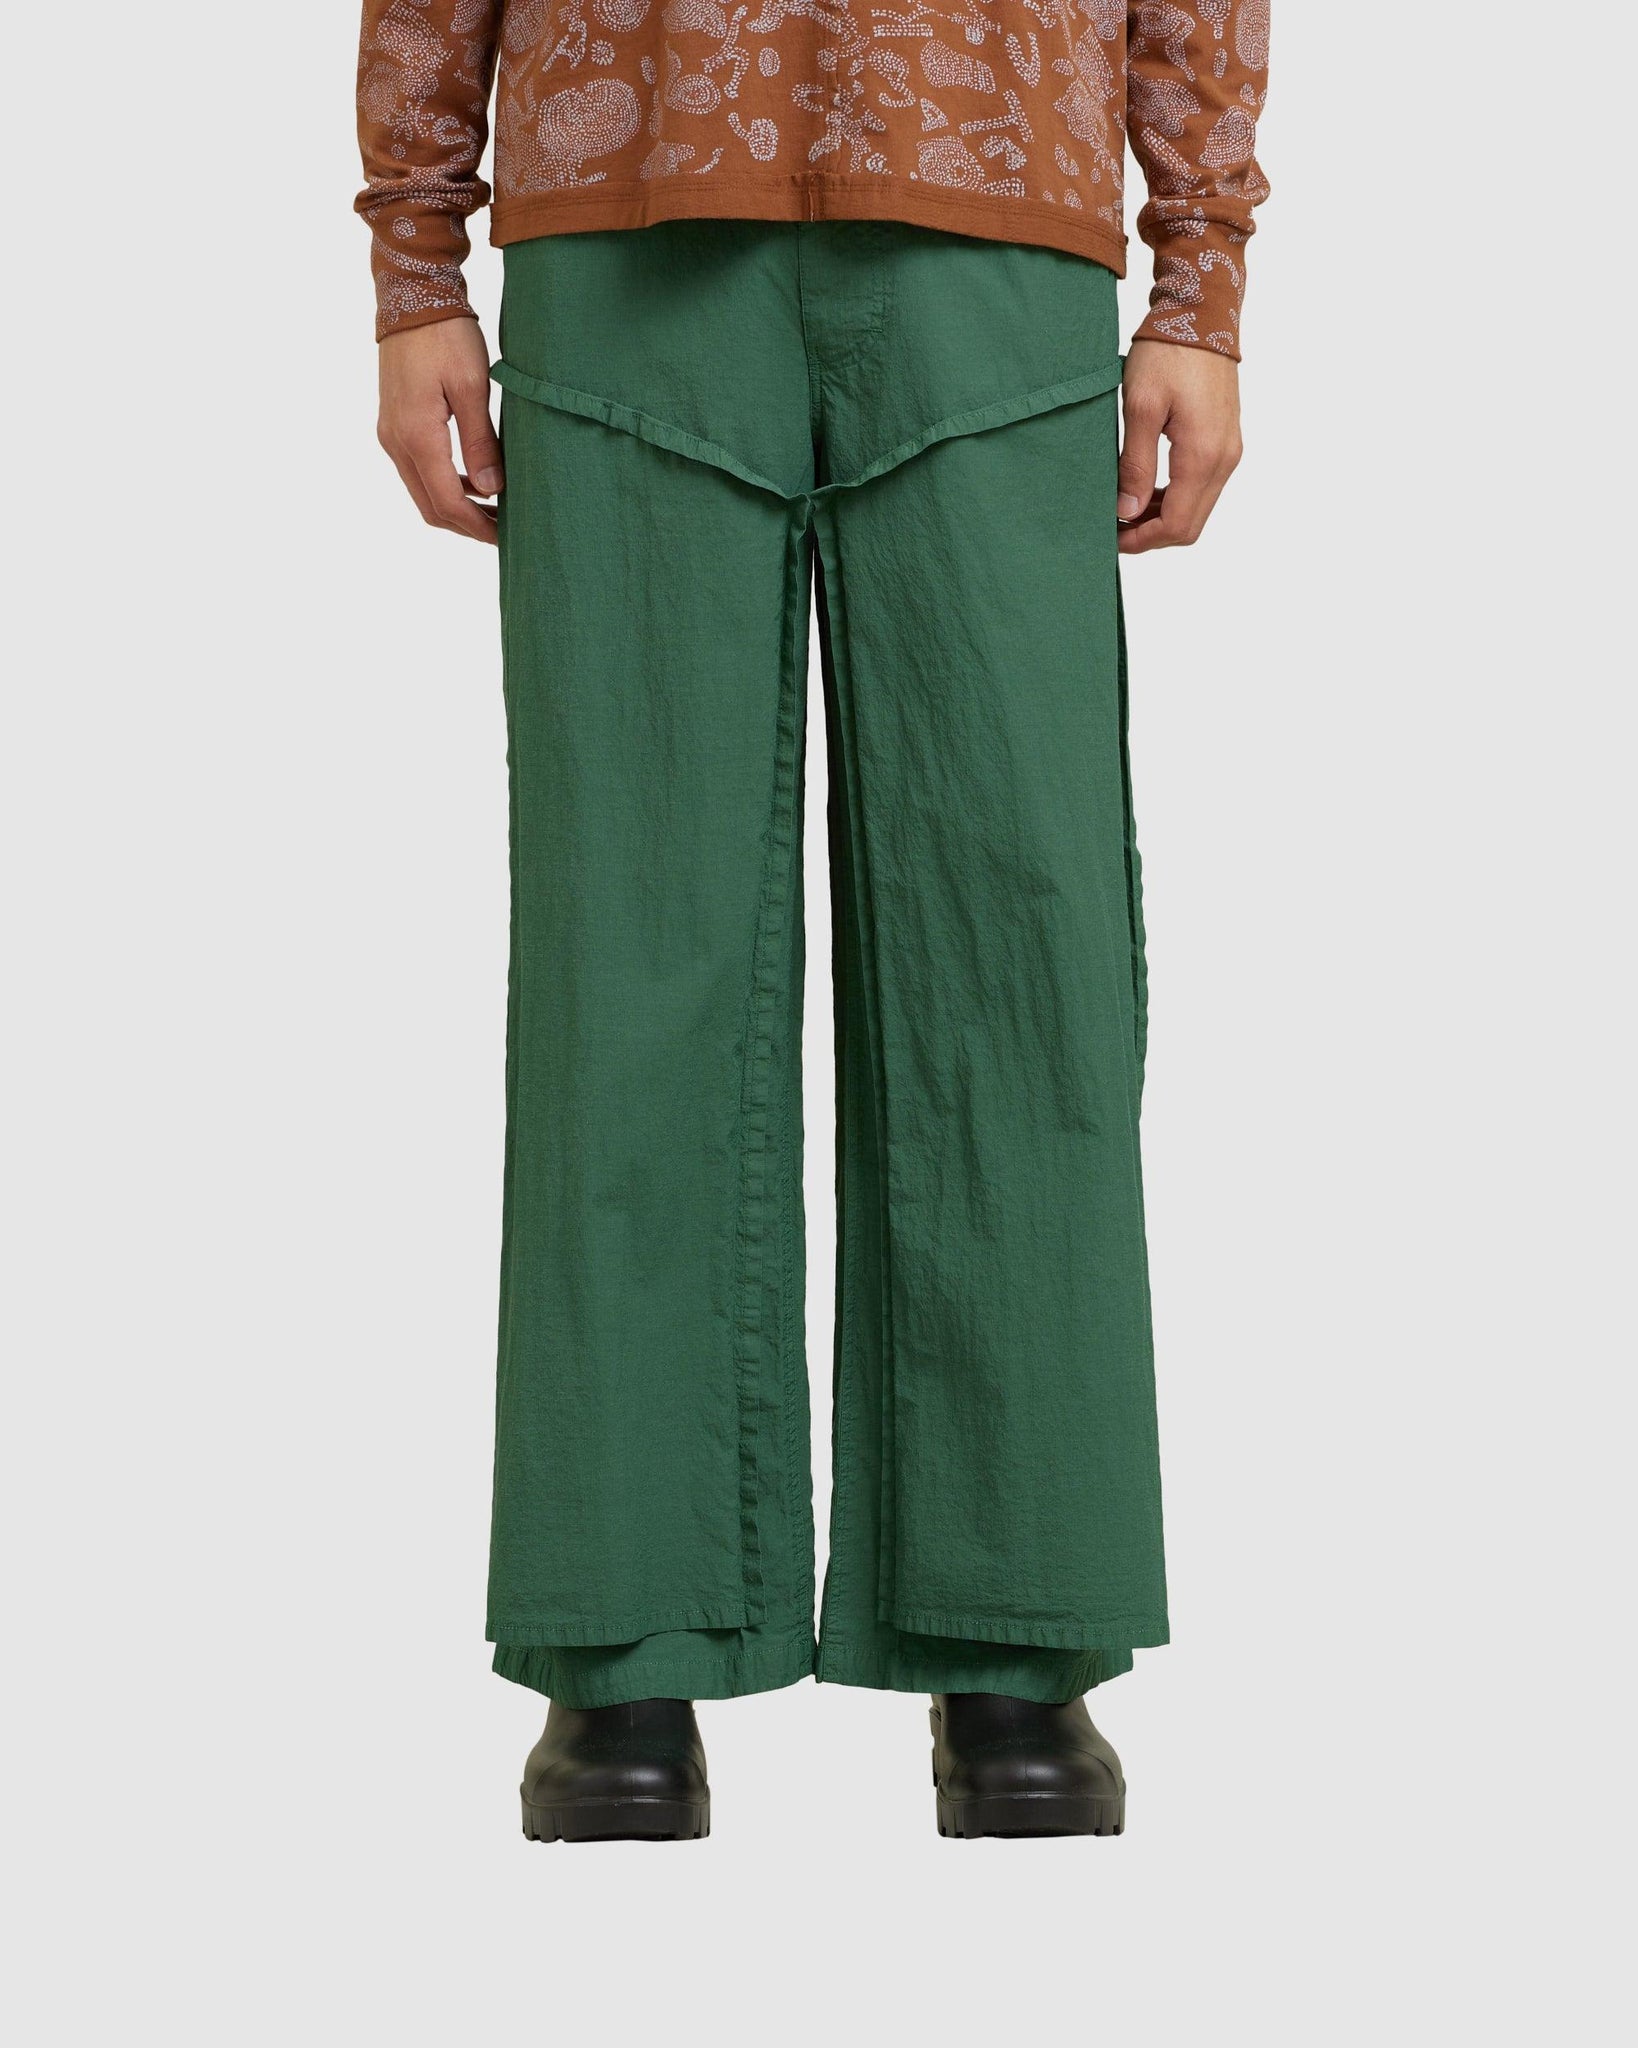 Panel Pants - {{ collection.title }} - Chinatown Country Club 